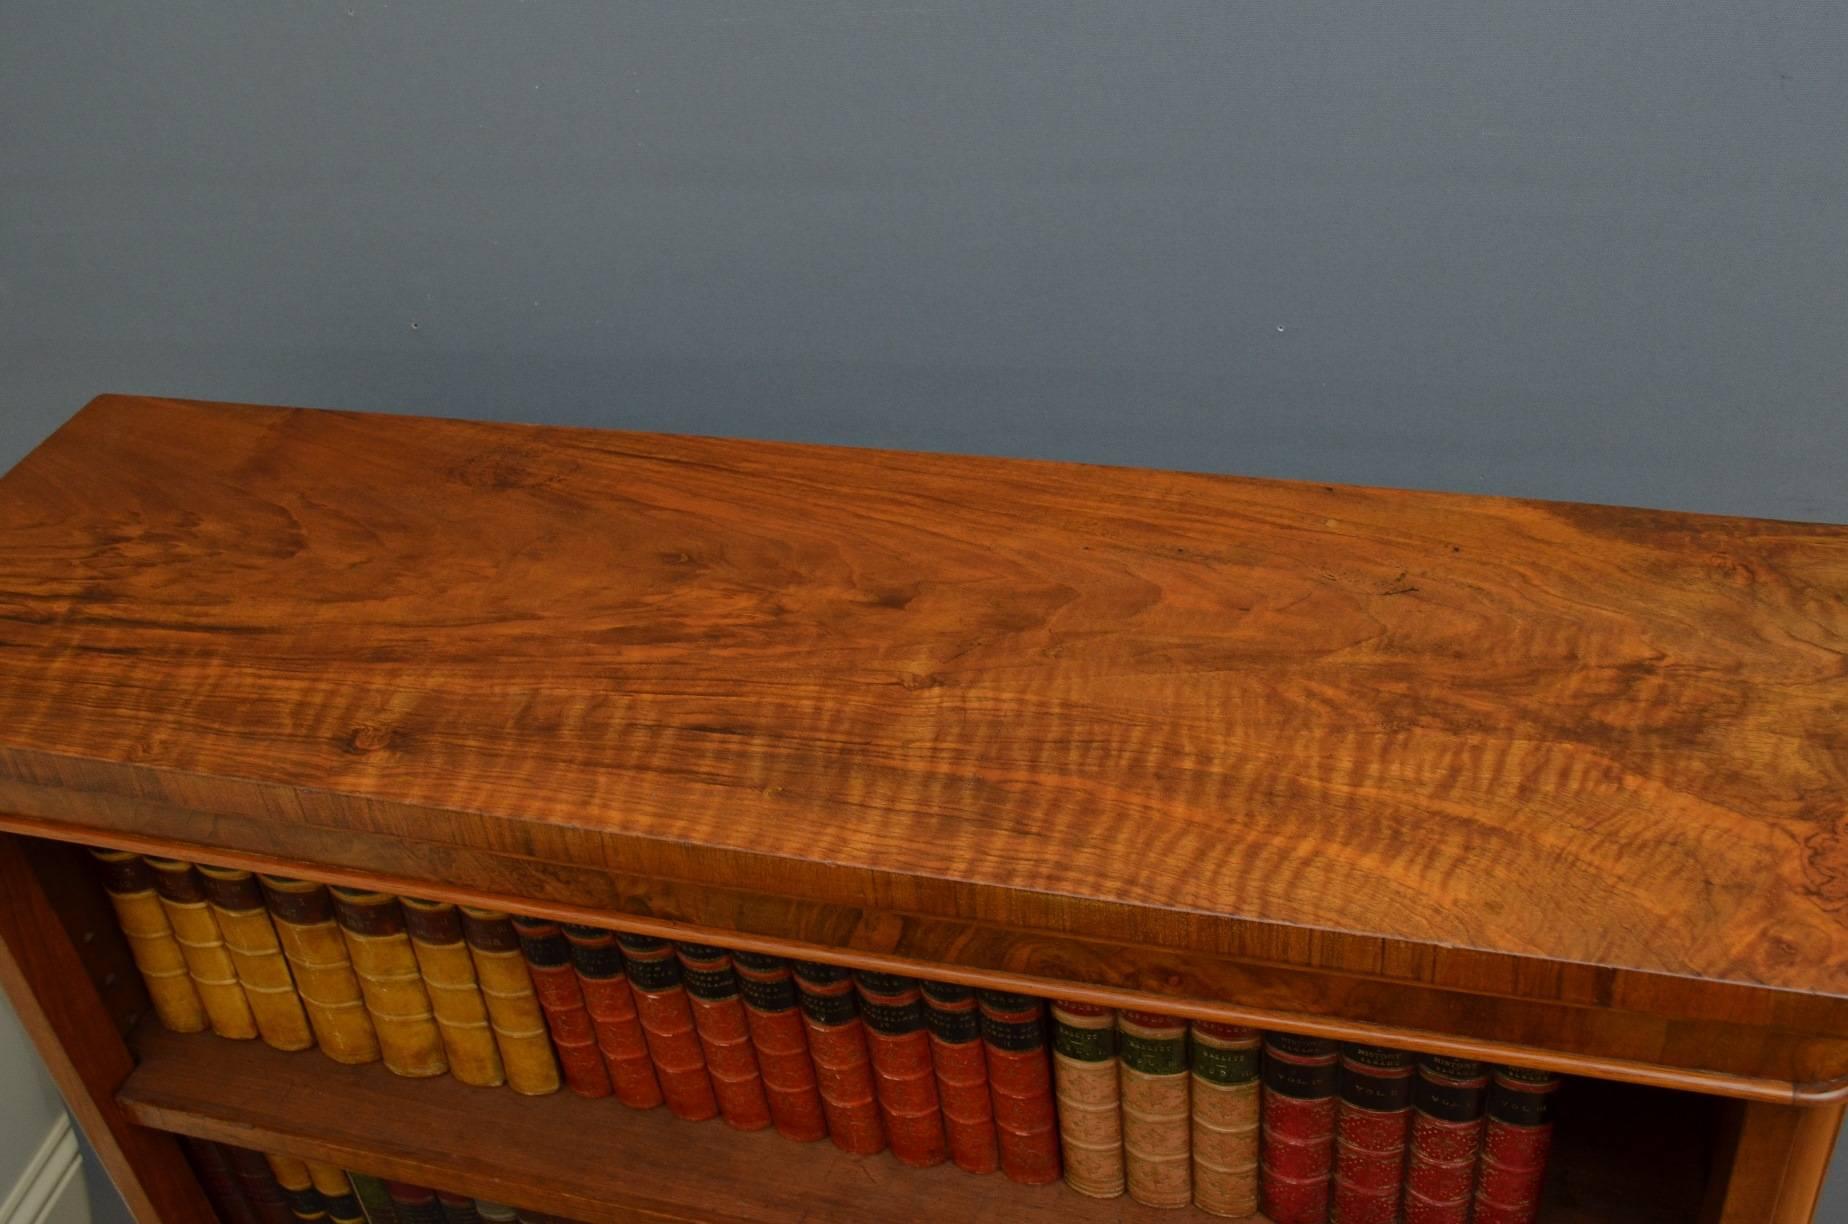 Sn4055, a Victorian figured walnut bookcase, having figured top above 2 height adjustable shelves flanked by rounded corners and figured sides, all standing on plinth base. This Victorian bookcase has been sympathetically restored and is ready to